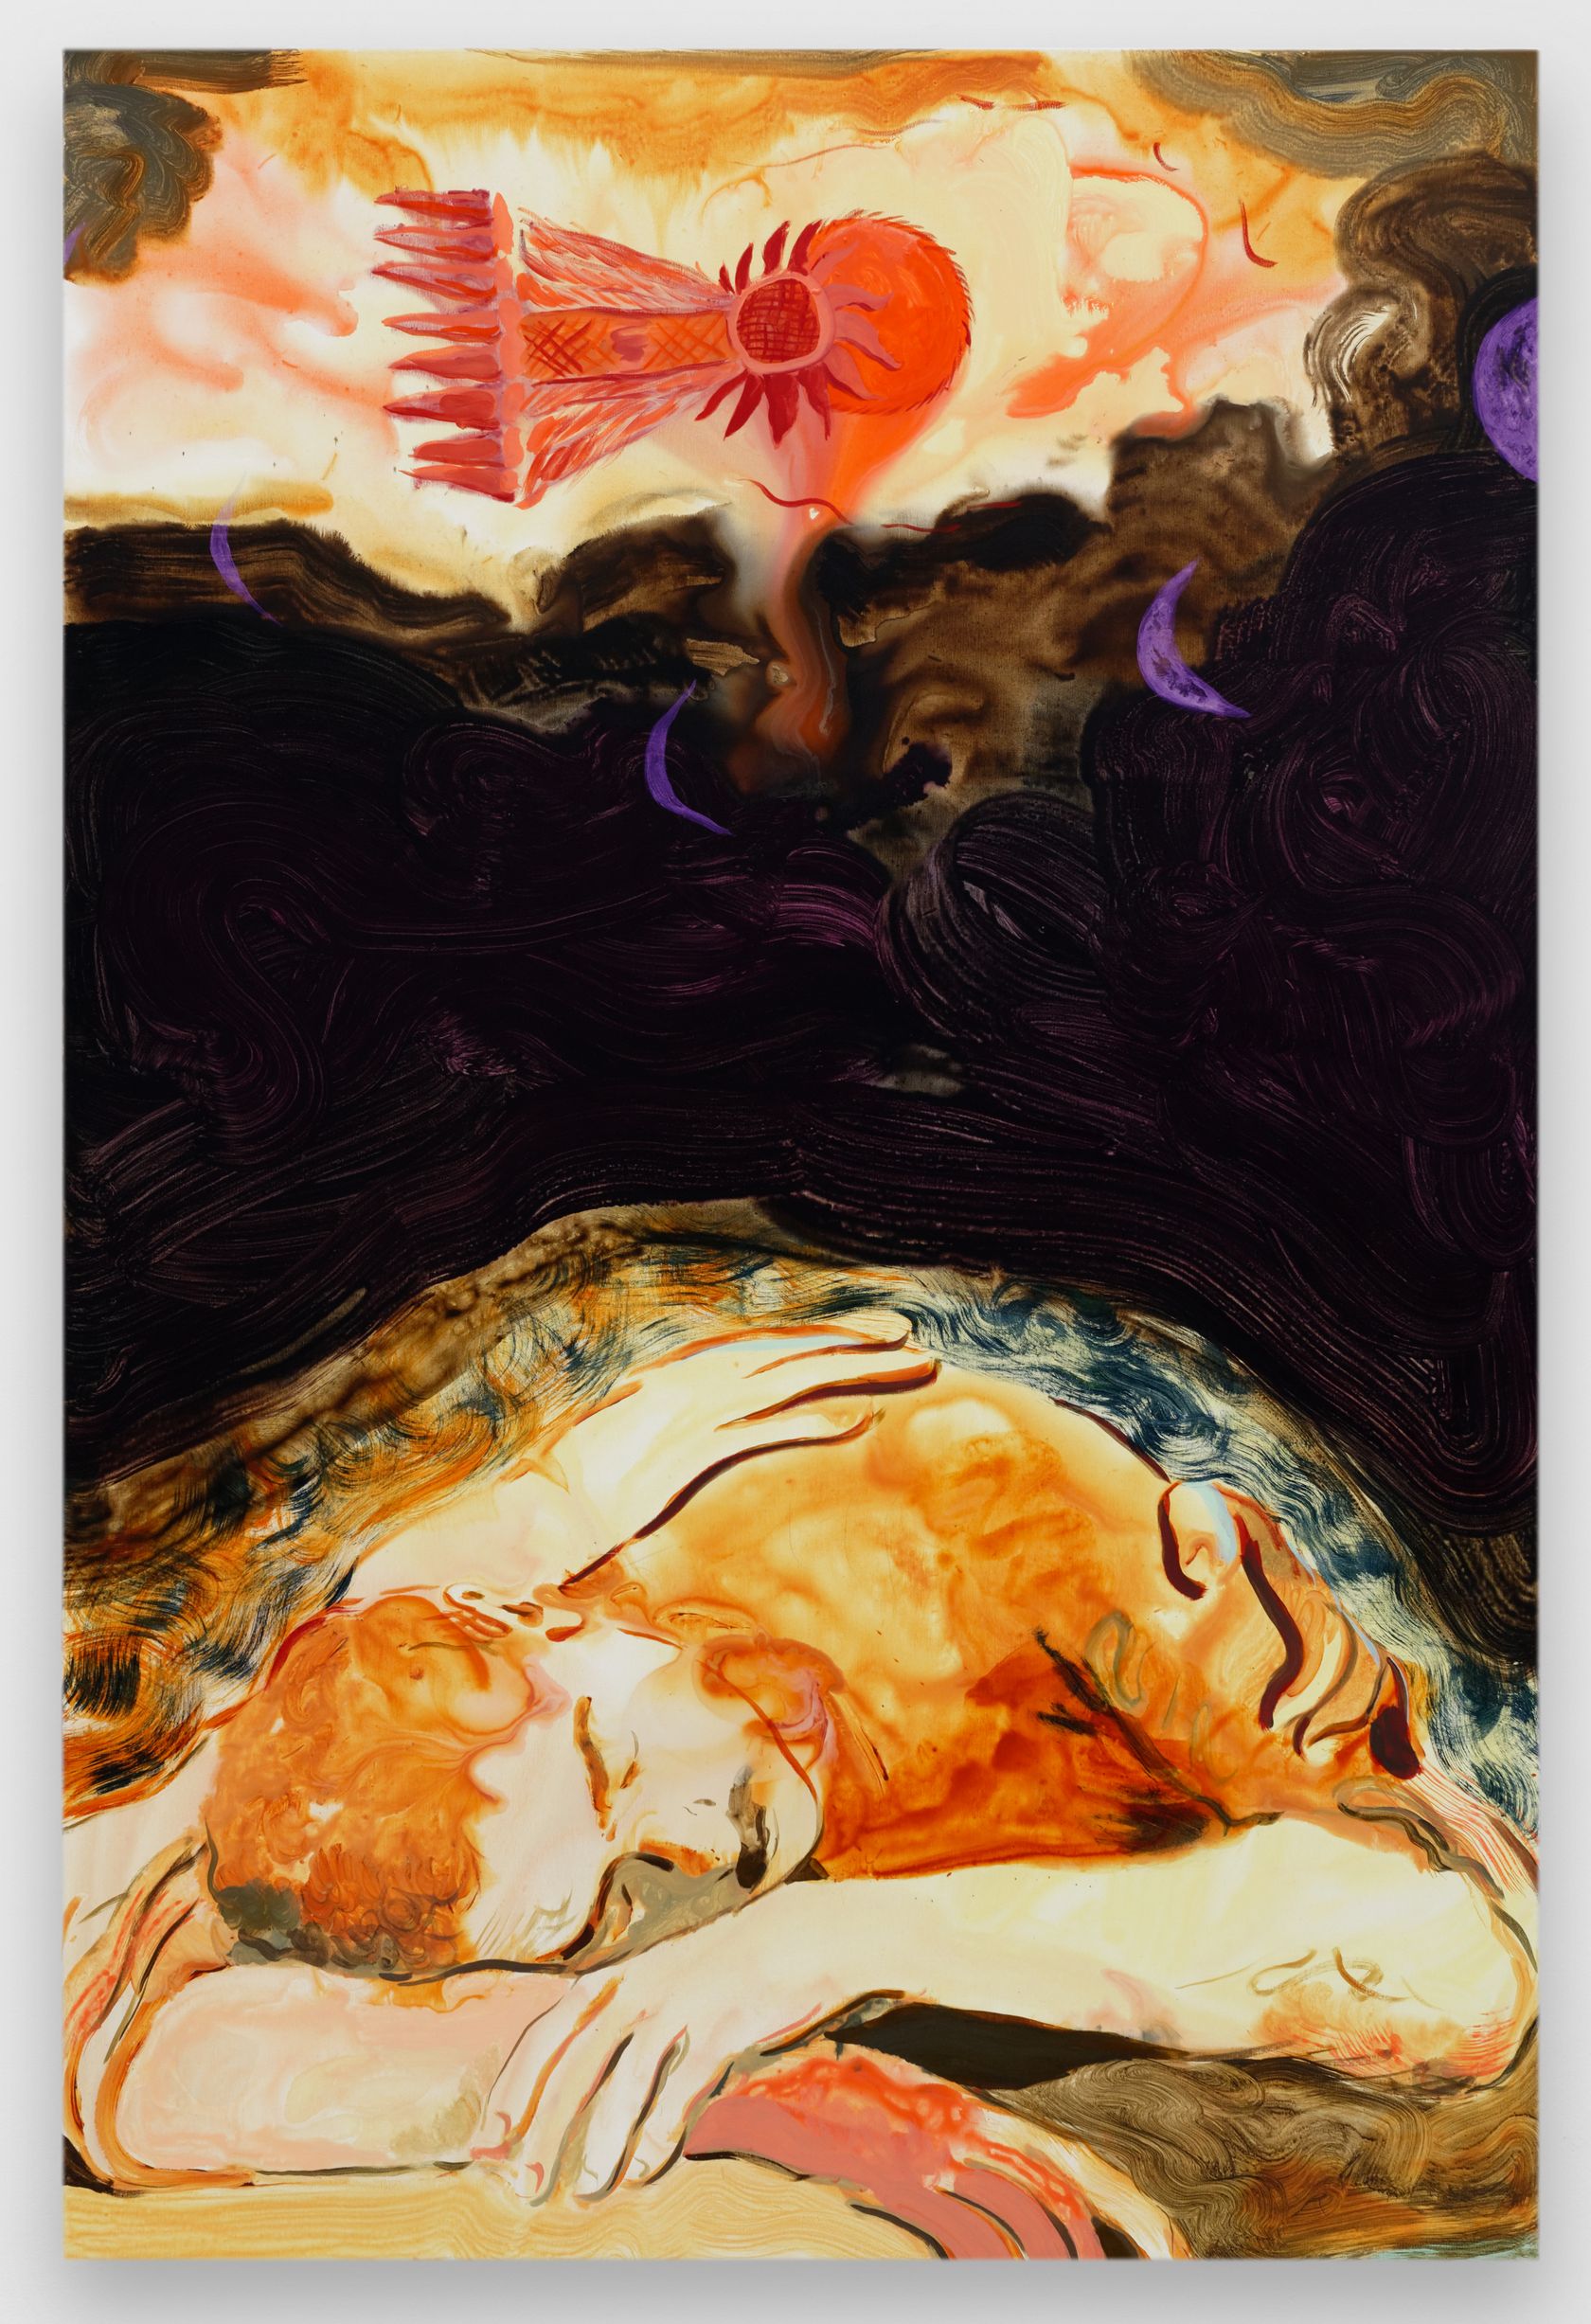 Anthony Cudahy, Sleeper and comet, 2022 Acrylique sur toile183 × 122 cm / 72 × 48 in.